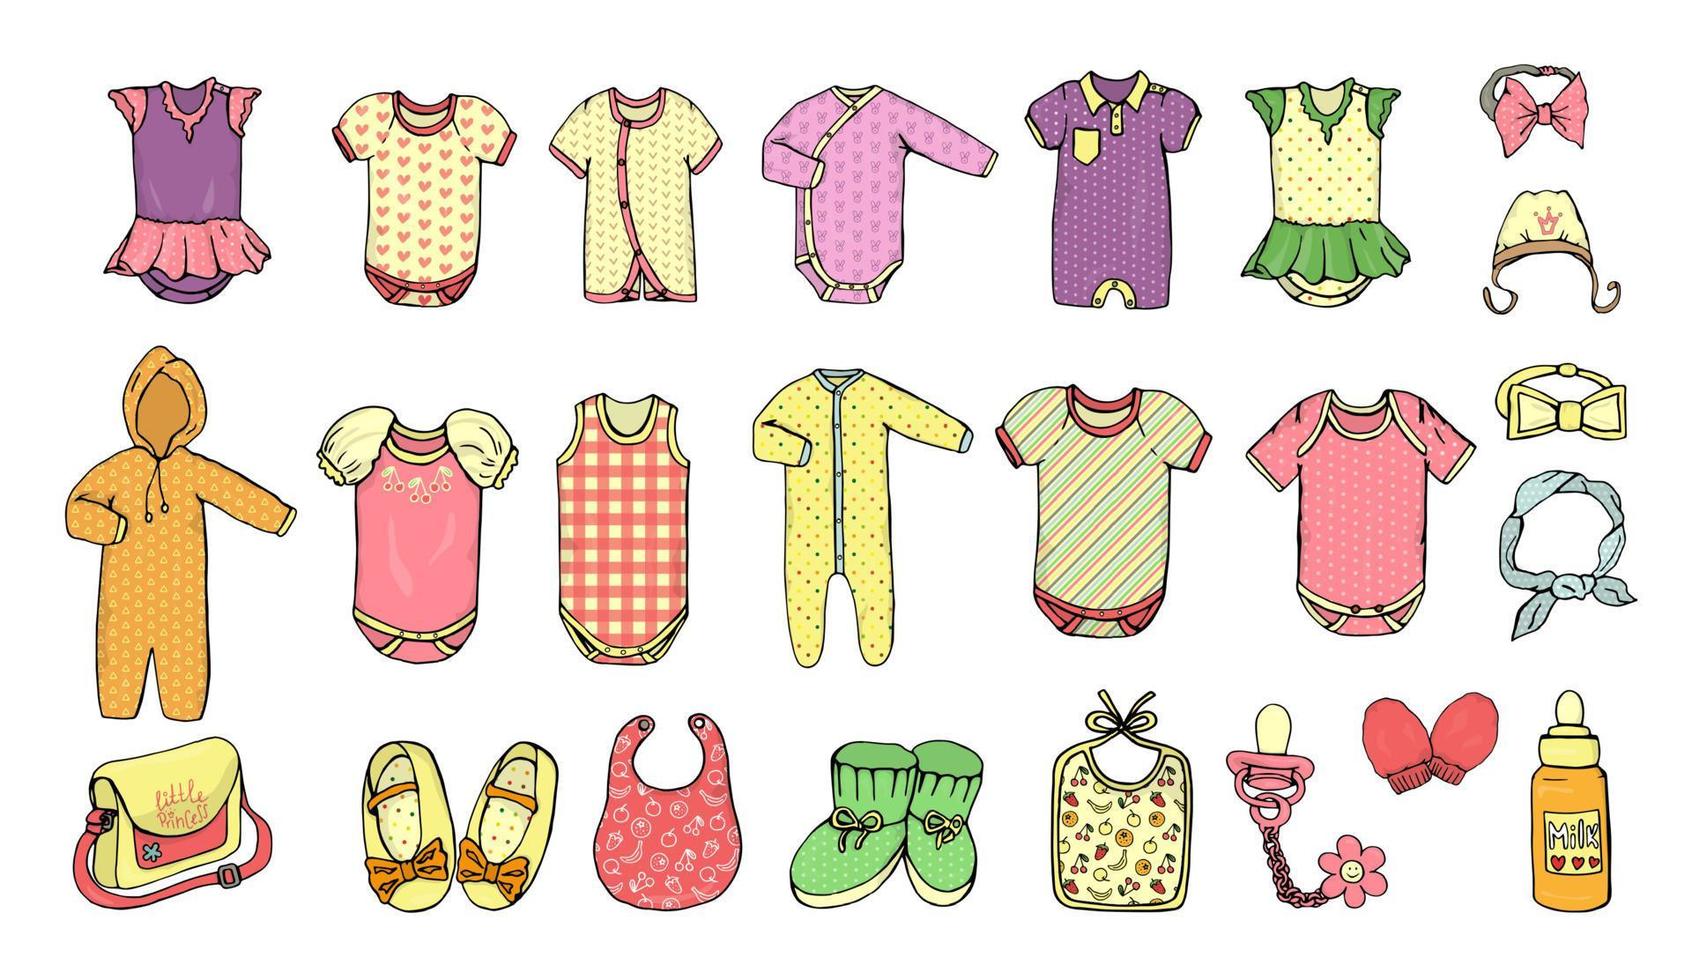 Vector illustration of baby clothes. Baby girl clothes set. Children fashion set. Stylish clothes and accessories for kids isolated on white background